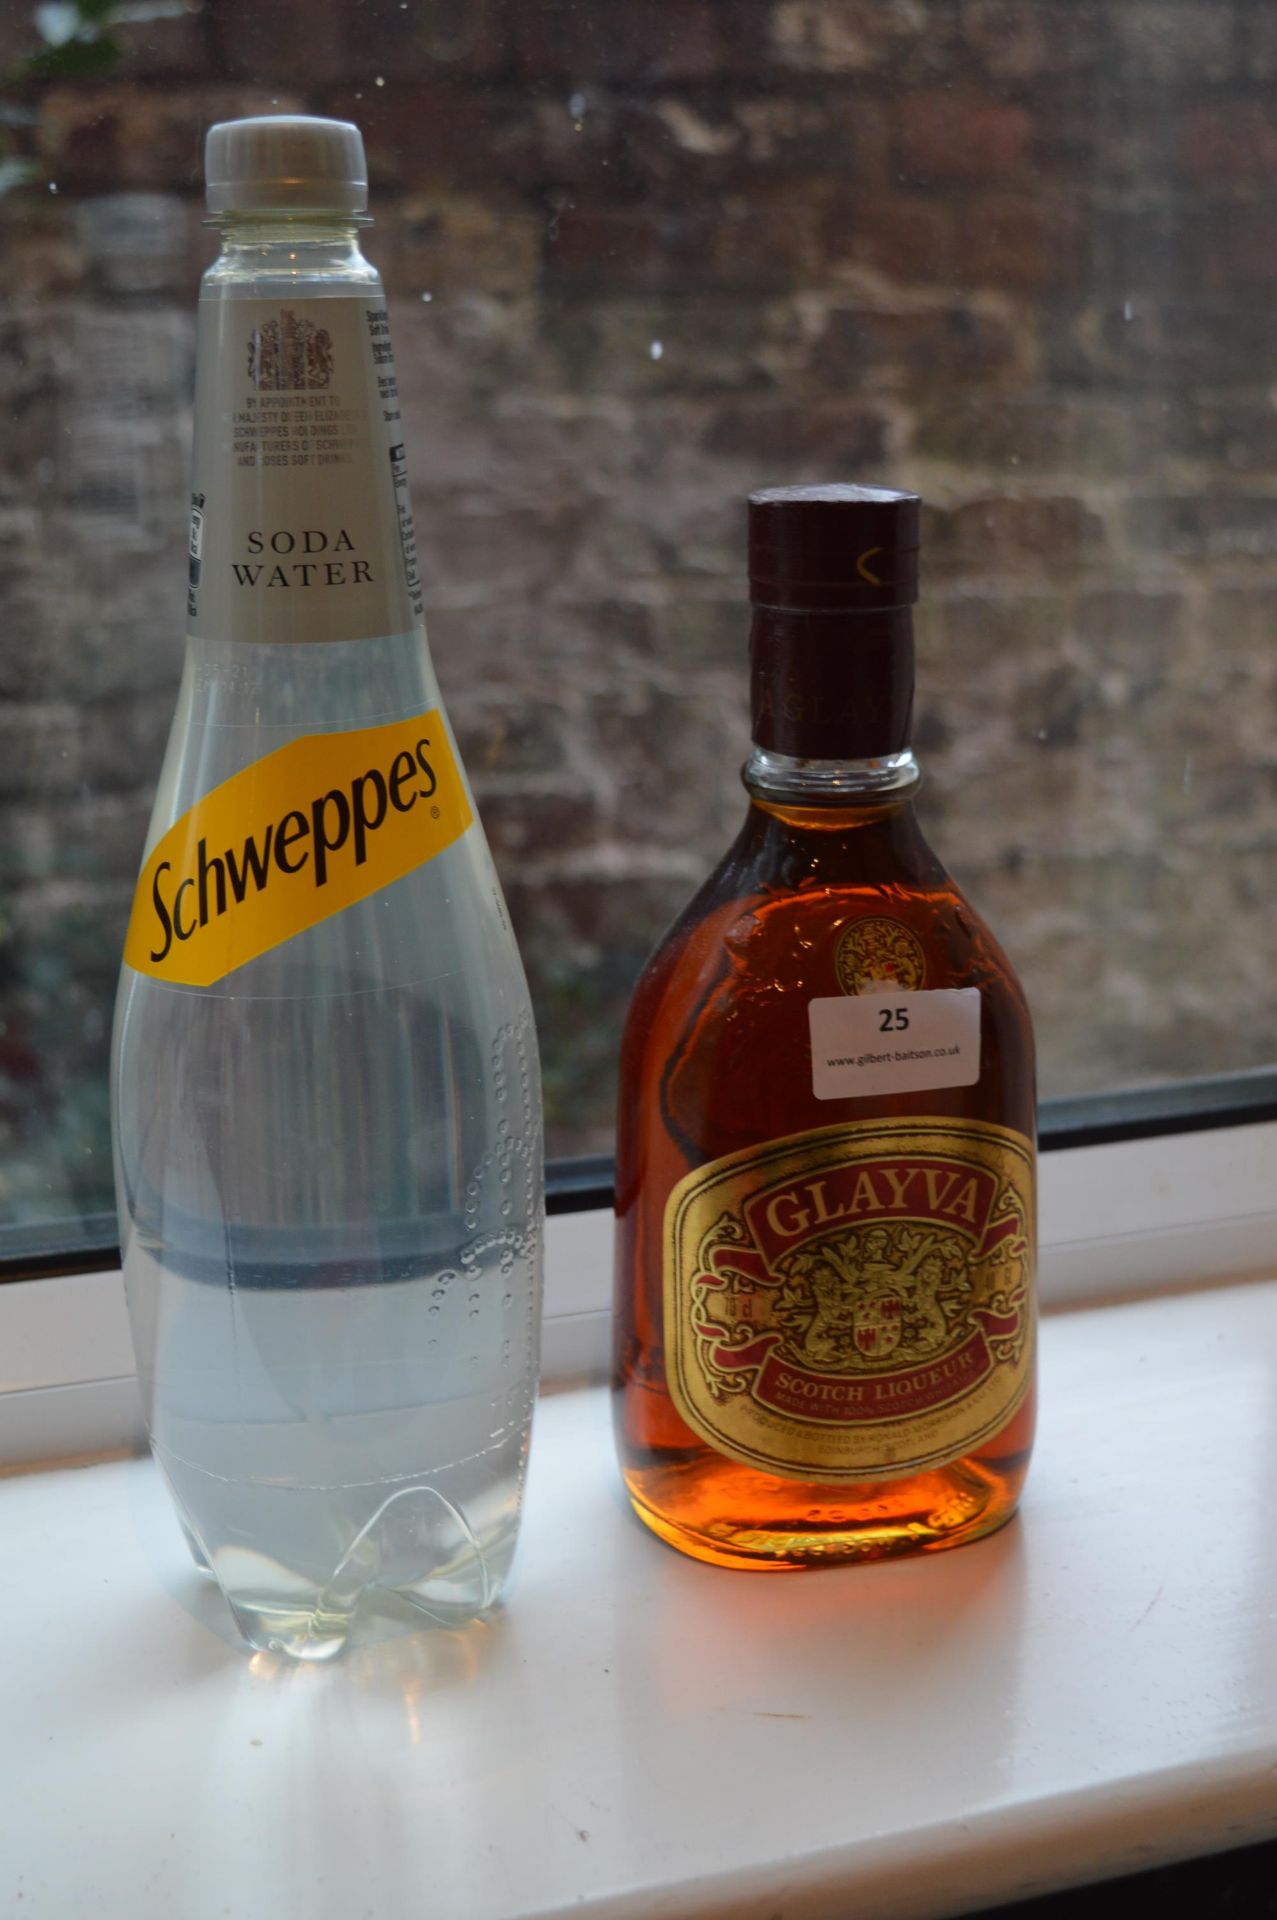 Bottle of Glayva Scotch Liqueur, and a Bottle of Schweppes Soda Water